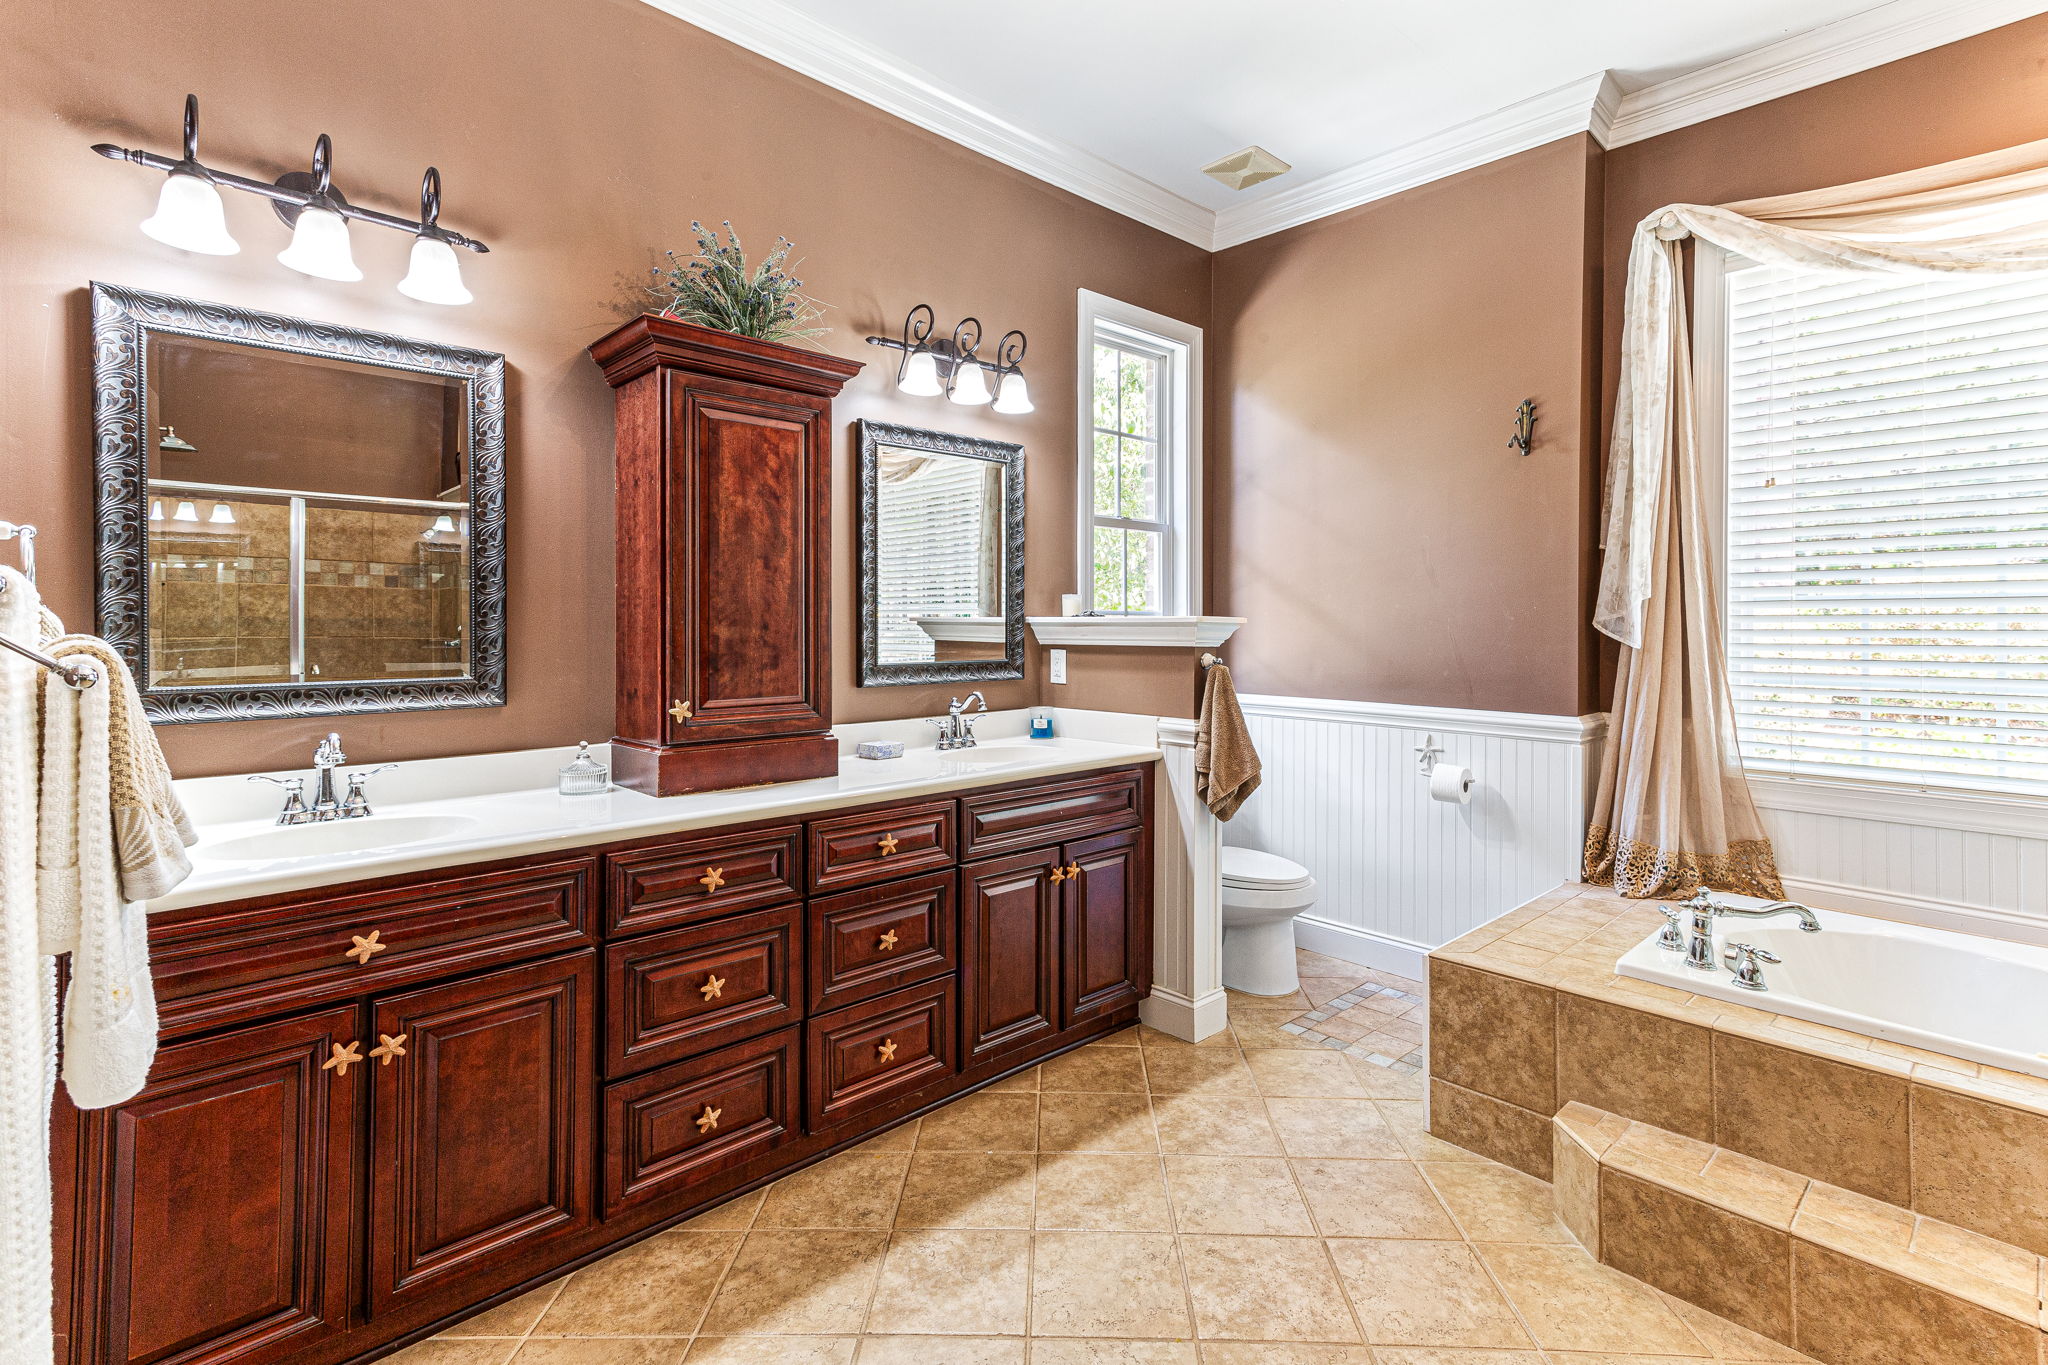 Master bathroom with custom-built cabinets, chair rail wainscoting, double sink vanity, alcove jetted tub.